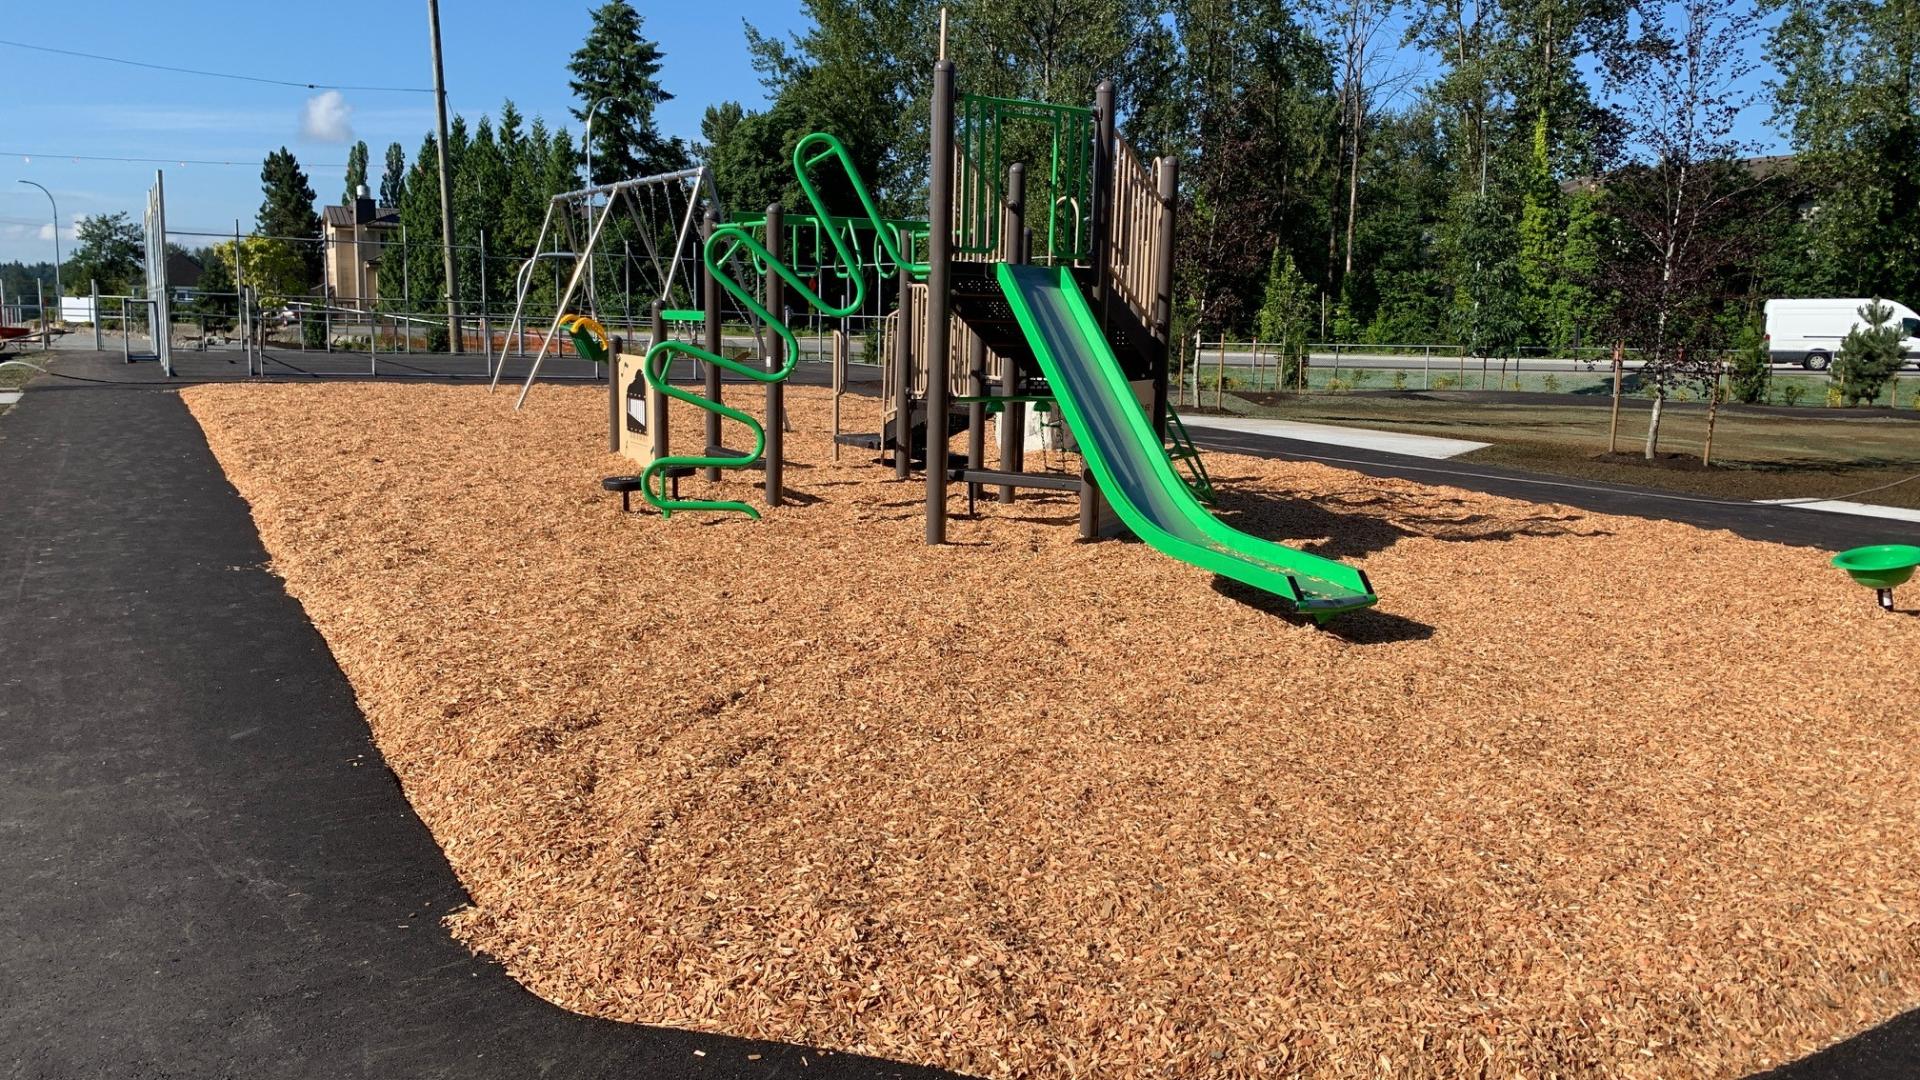 A black and green playground on mulch surrounded by a wide, paved path. On the far side there are benches.